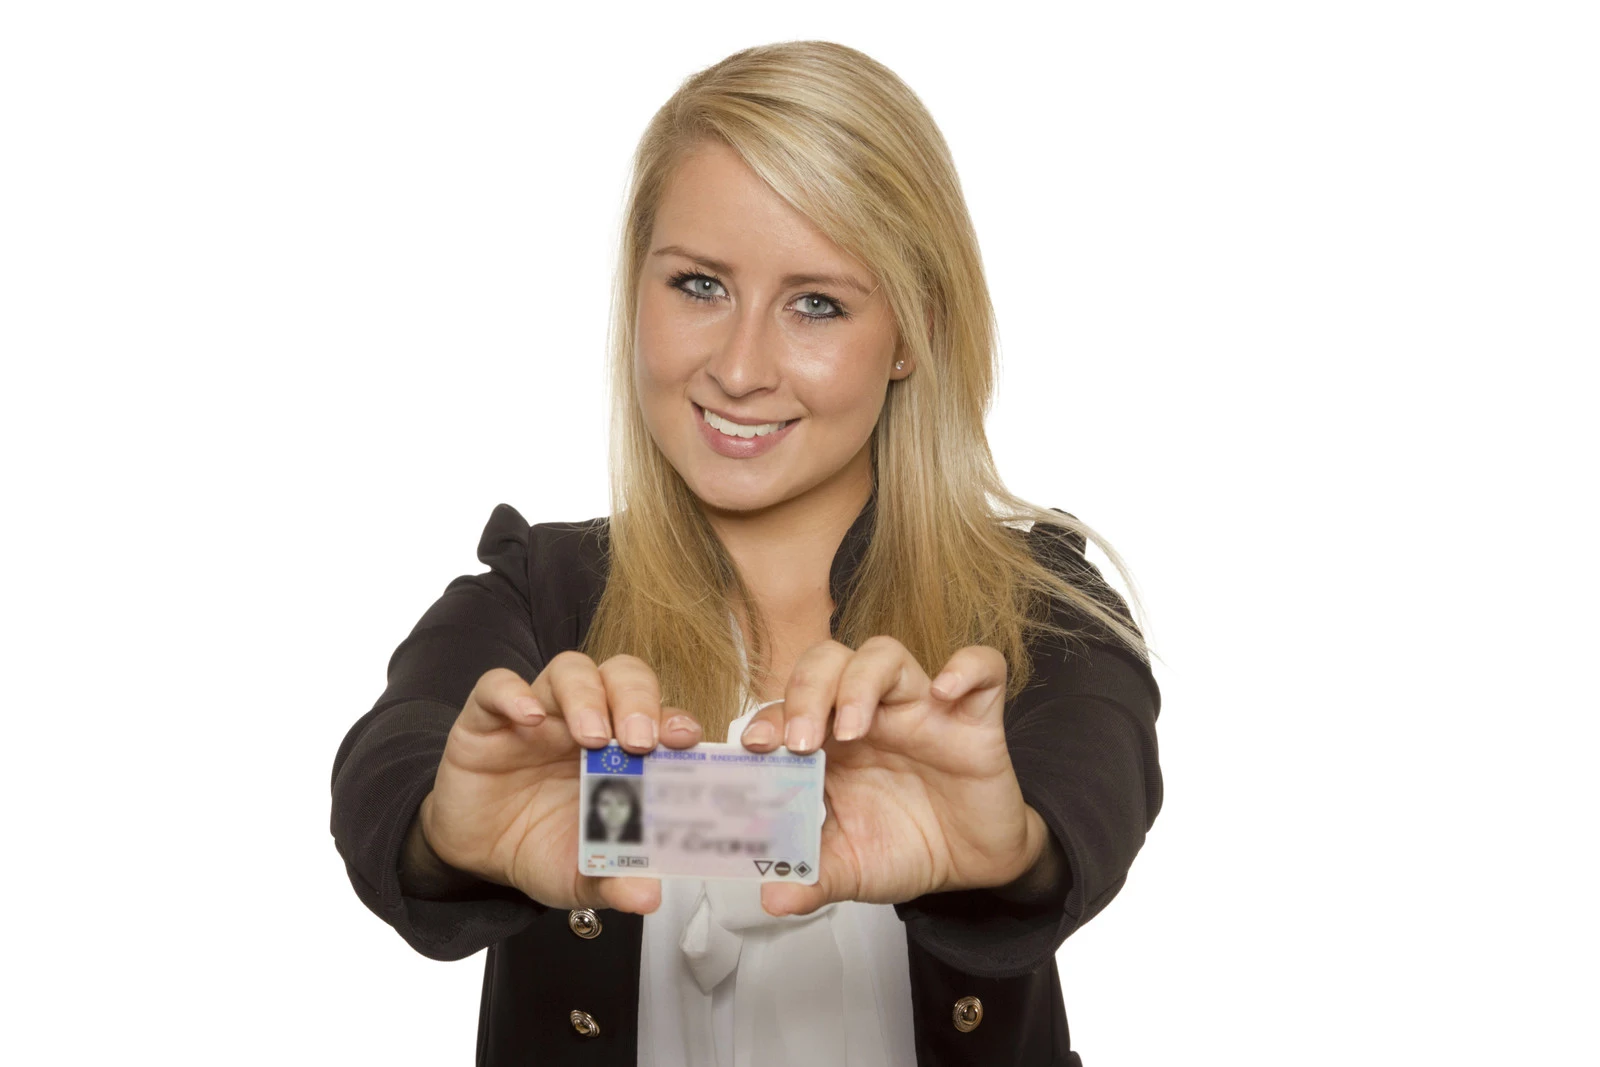 Young woman showing her driver's license